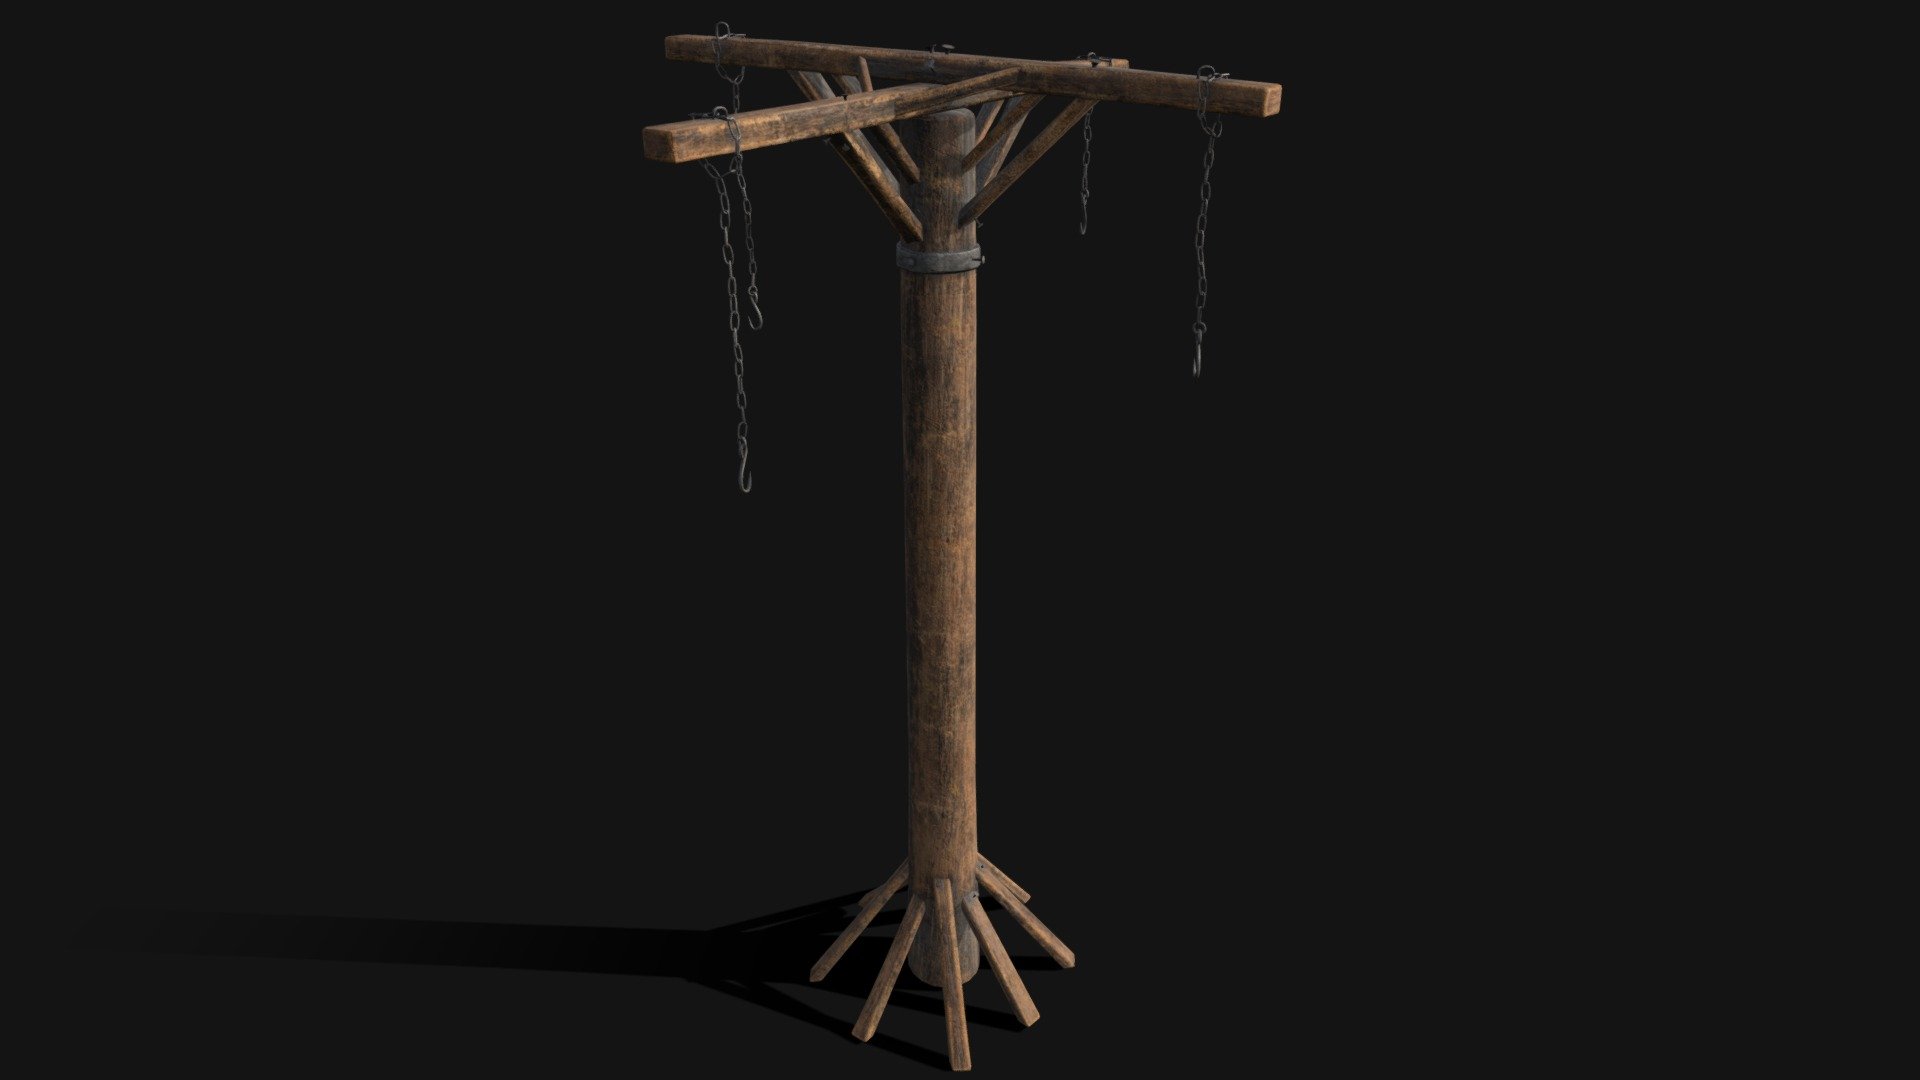 Medieval Gallow Pole 3D Model. This model contains the Medieval Gallow Pole itself 

All modeled in Maya, textured with Substance Painter.

The model was built to scale and is UV unwrapped properly

⦁   49952 tris. 

⦁   Contains: .FBX .OBJ and .DAE

⦁   Model has clean topology. No Ngons.

⦁   Built to scale

⦁   Unwrapped UV Map

⦁   4K Texture set

⦁   High quality details

⦁   Based on real life references

⦁   Renders done in Marmoset Toolbag

Polycount: 

Verts 25392

Edges 50472

Faces 25122

Tris 49952

If you have any questions please feel free to ask me 3d model